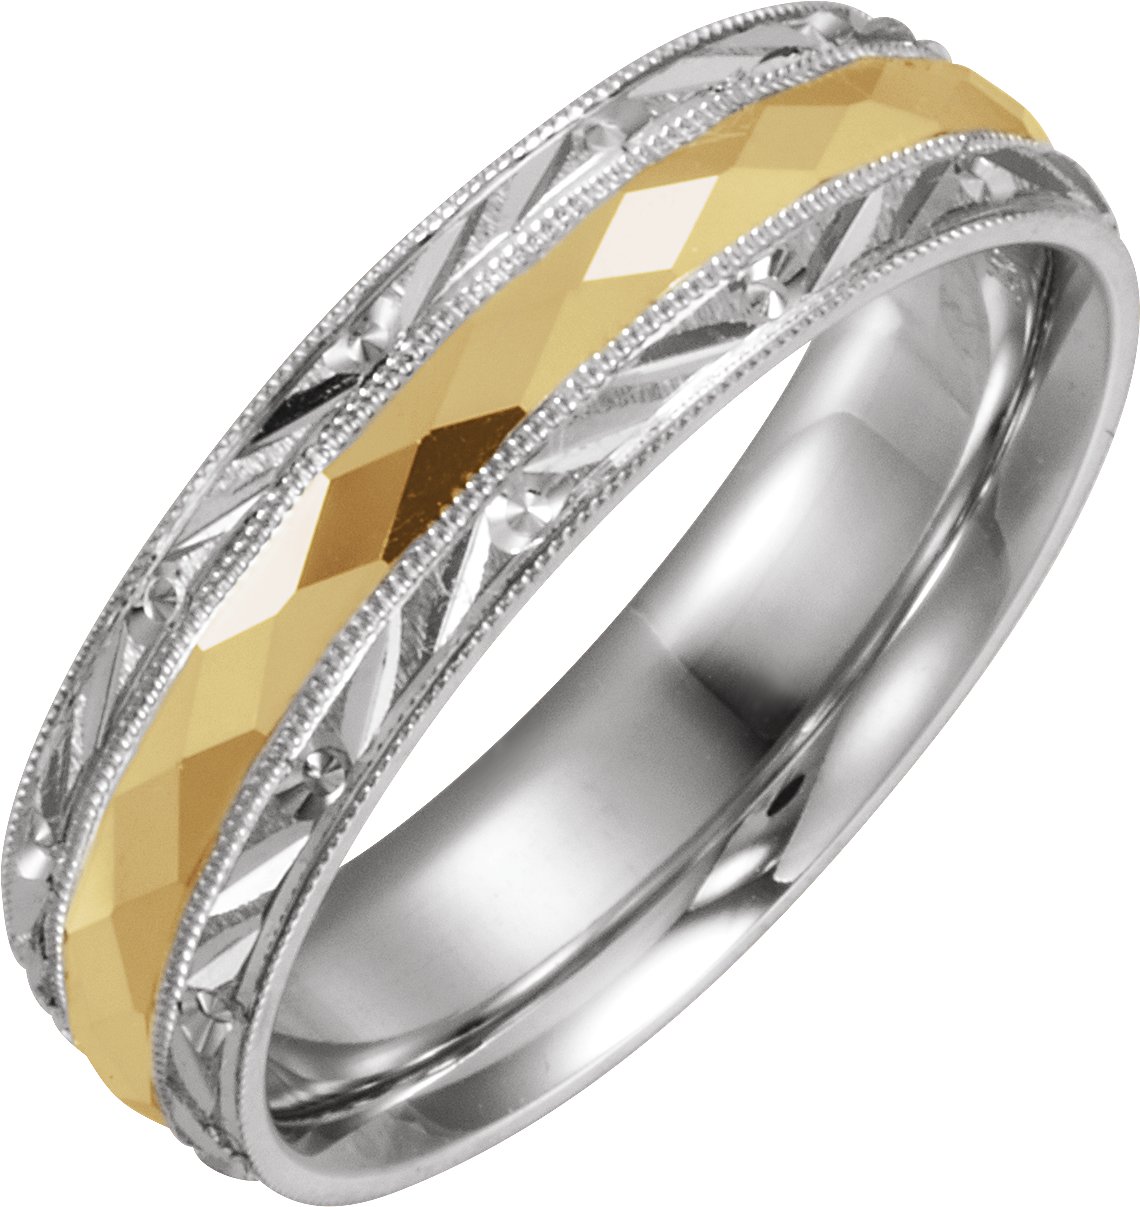 14K White/Yellow 6 mm Design-Engraved Band with Milgrain Size 10